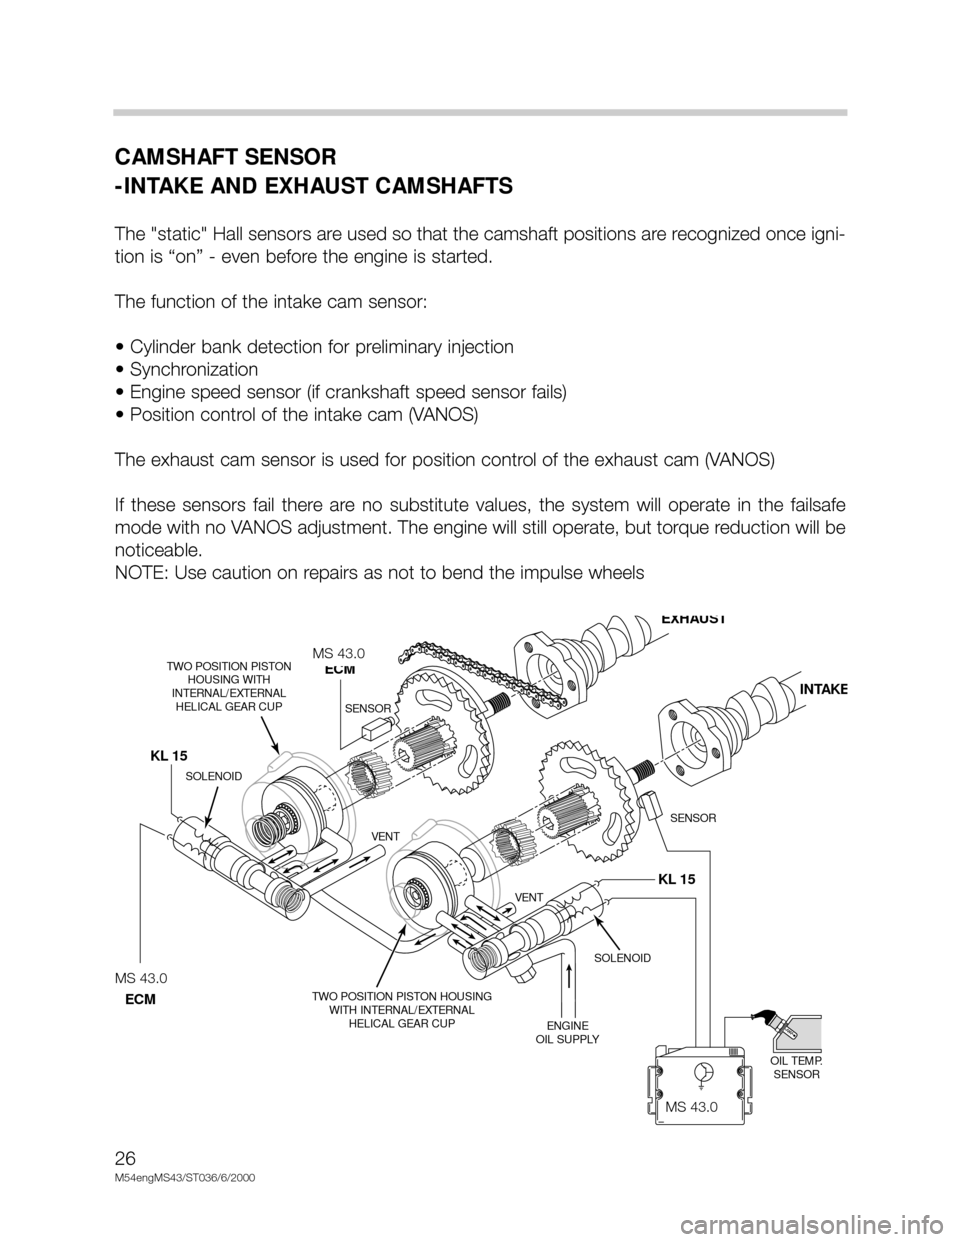 BMW X5 2002 E53 M54 Engine Workshop Manual 26
M54engMS43/ST036/6/2000
CAMSHAFT SENSOR
-INTAKE AND EXHAUST CAMSHAFTS
The "static" Hall sensors are used so that the camshaft positions are recognized once igni-
tion is “on” - even before the 